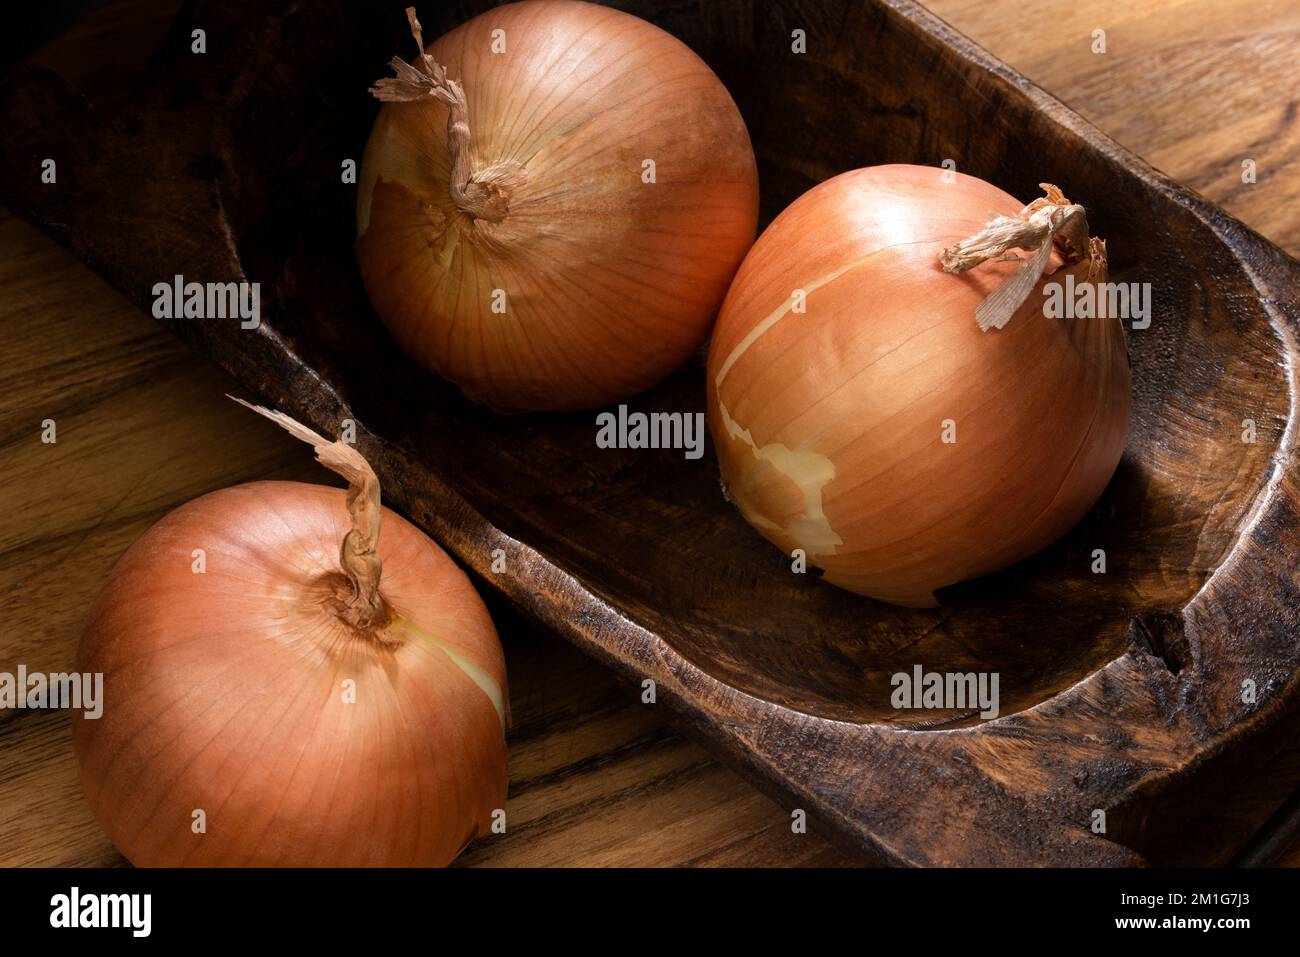 Whole Onions in a Wood Bowl Stock Photo